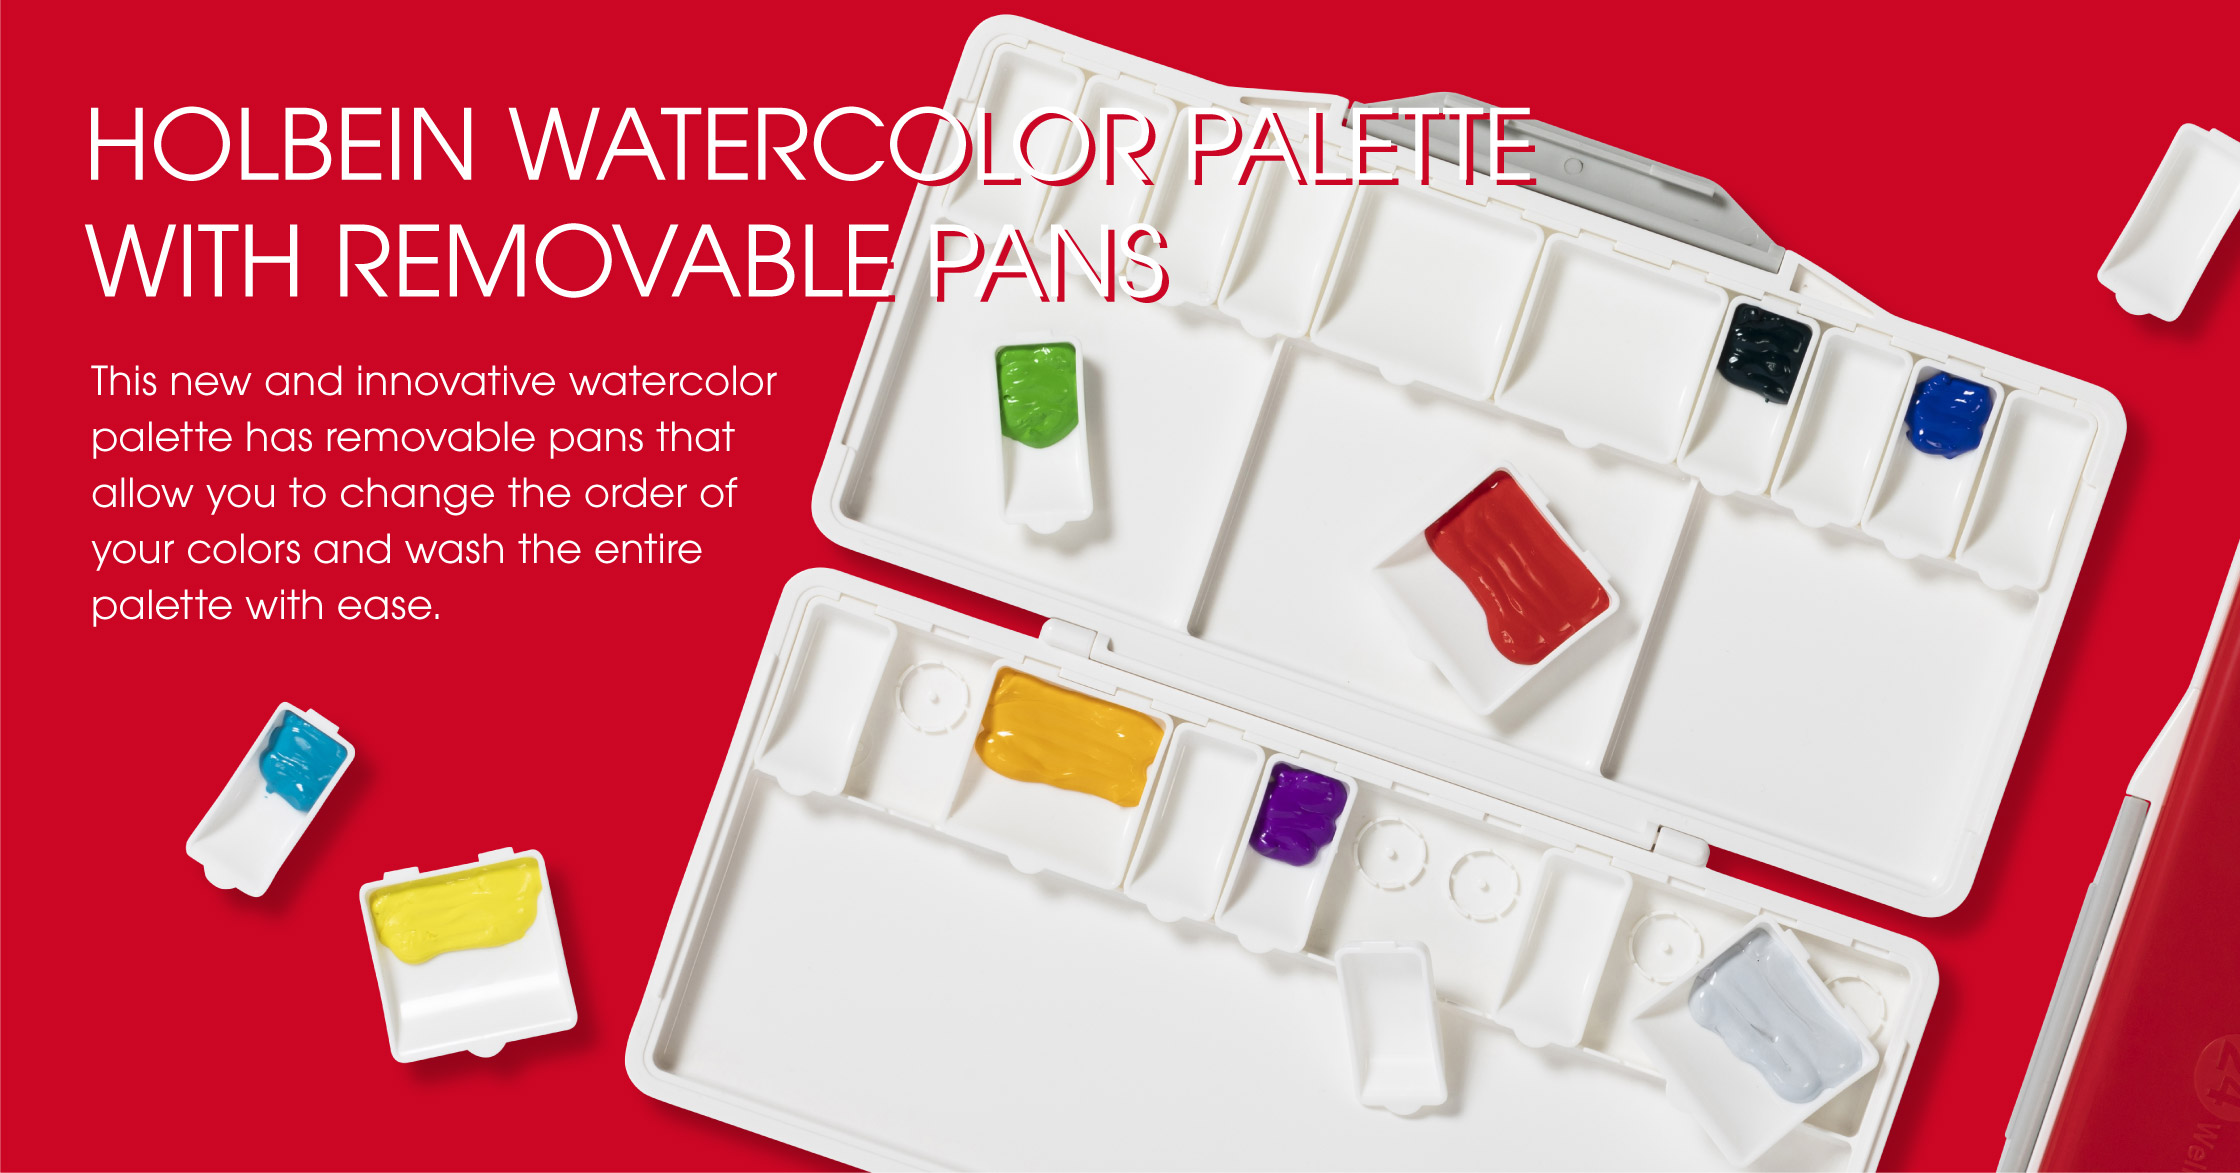 Holbein Watercolor Palette
    with Removable Pans